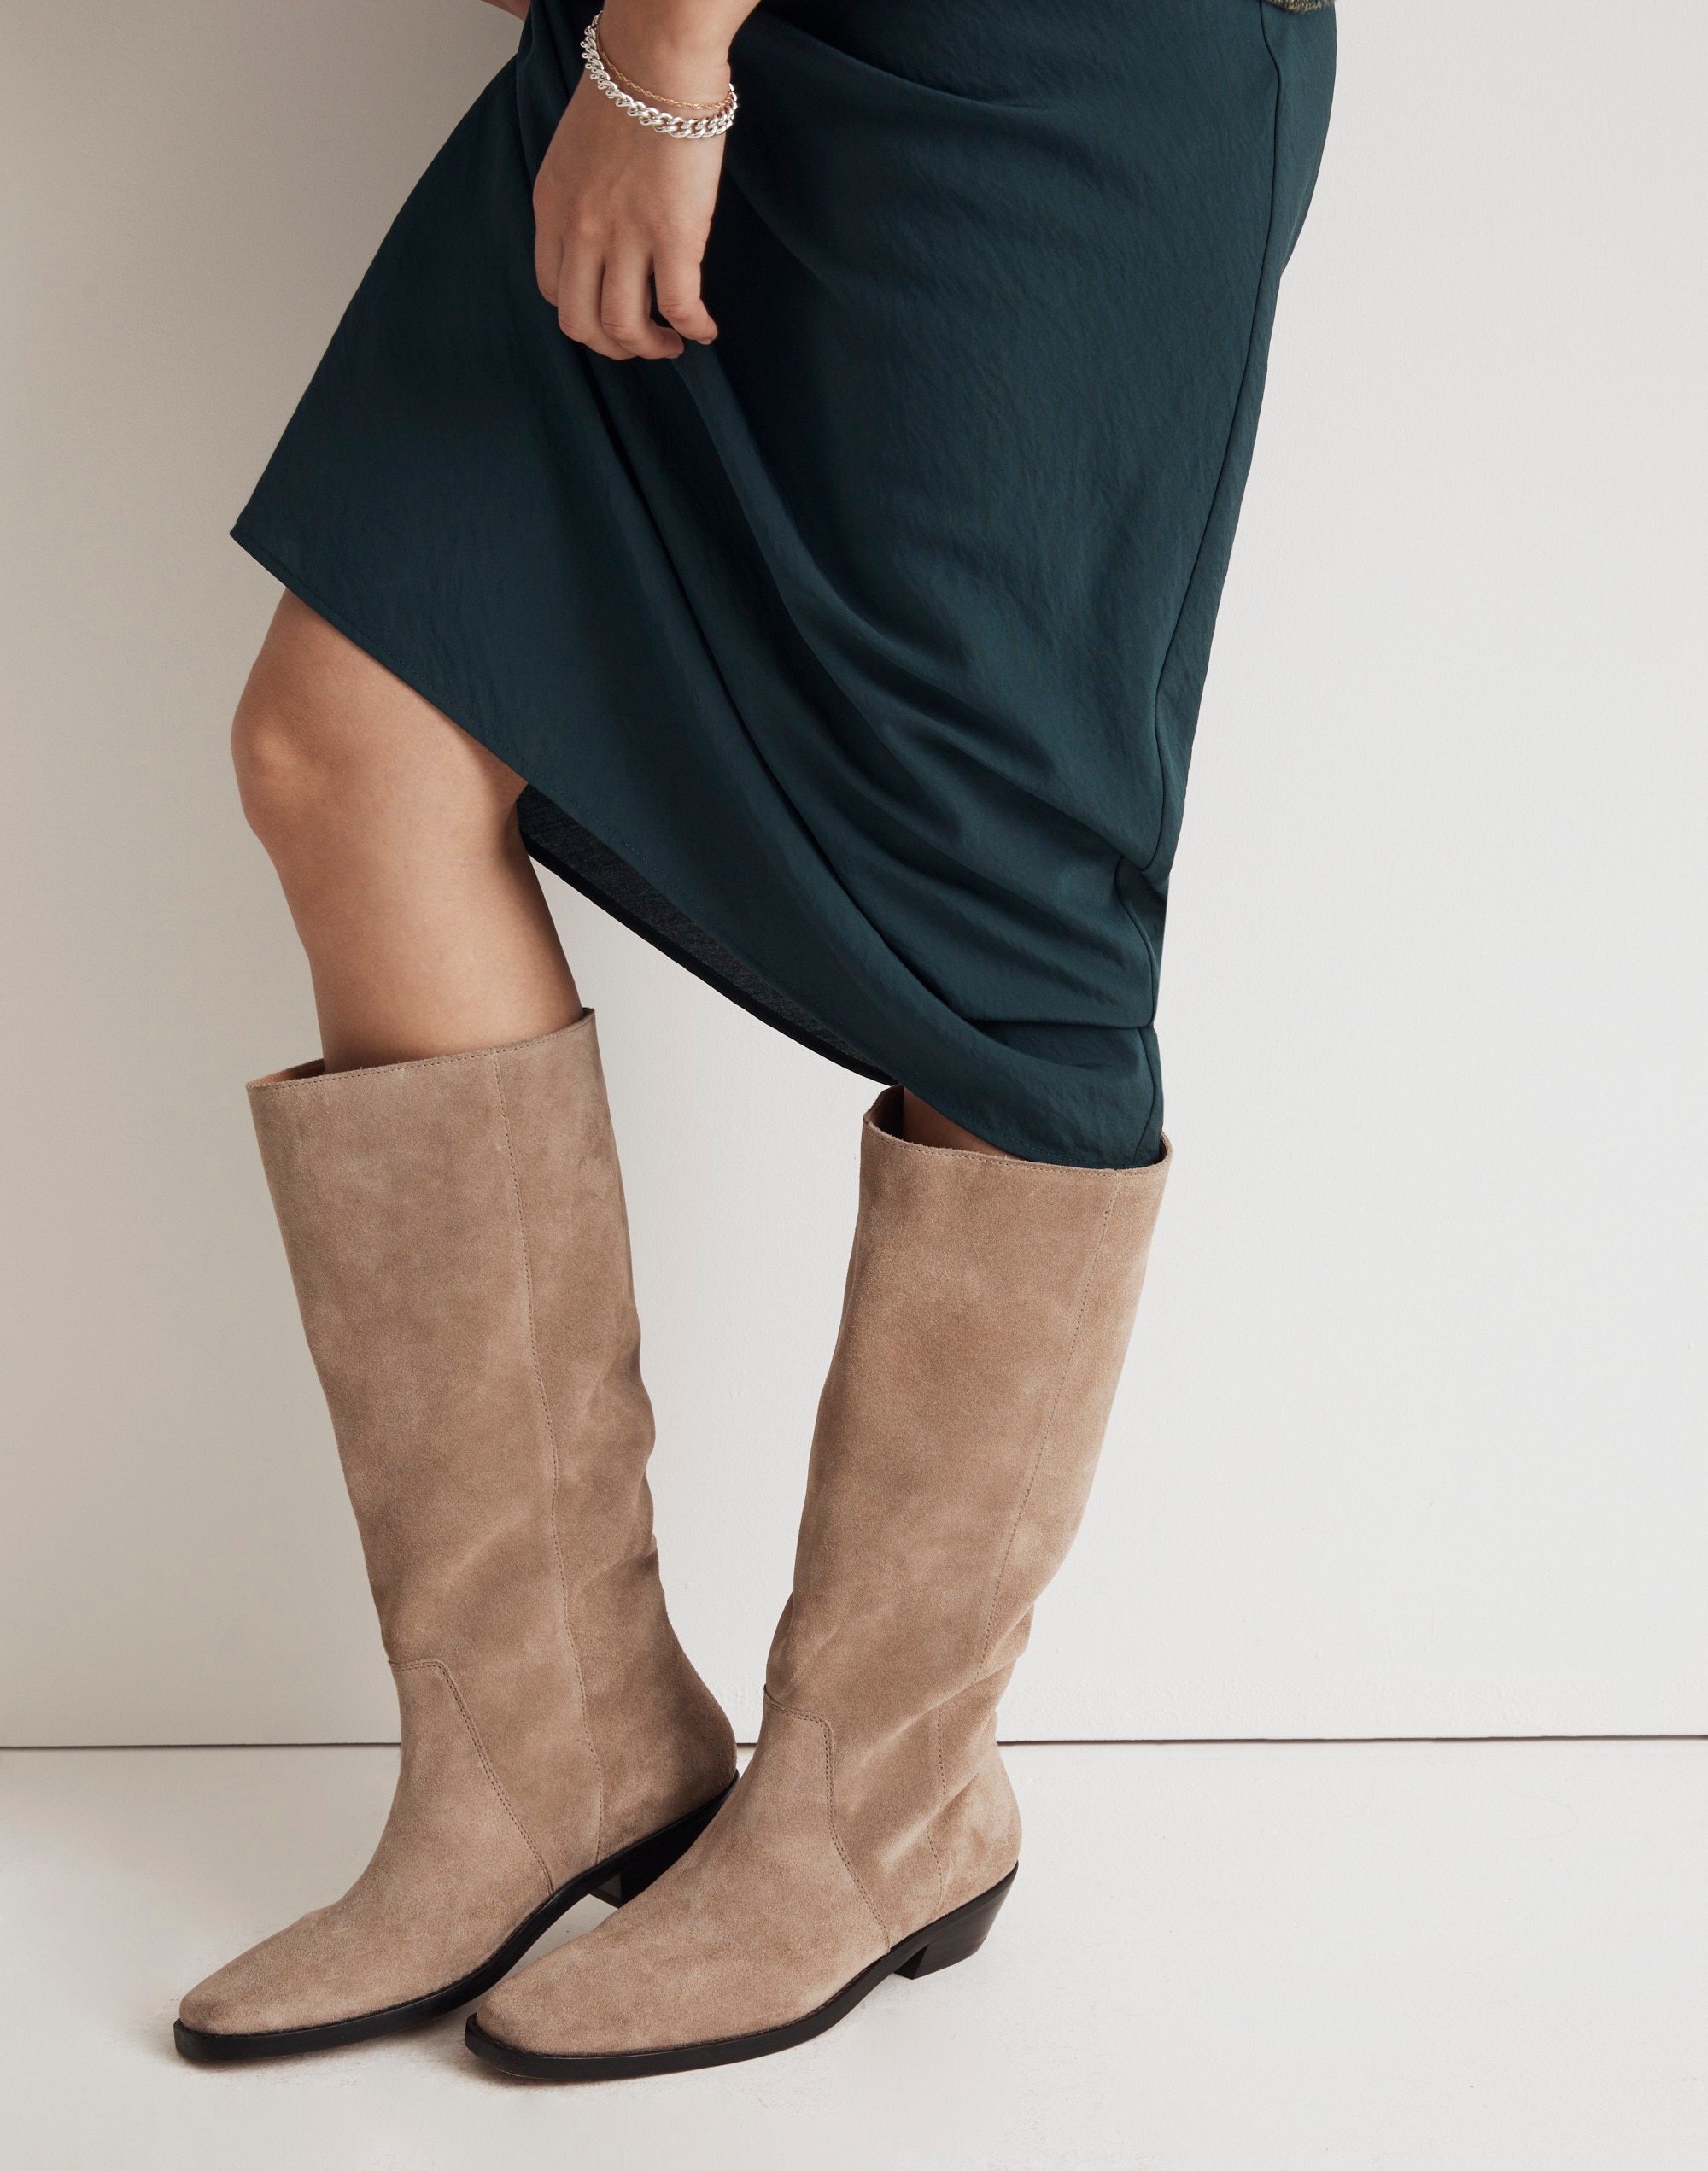 The Antoine Tall Boot Suede